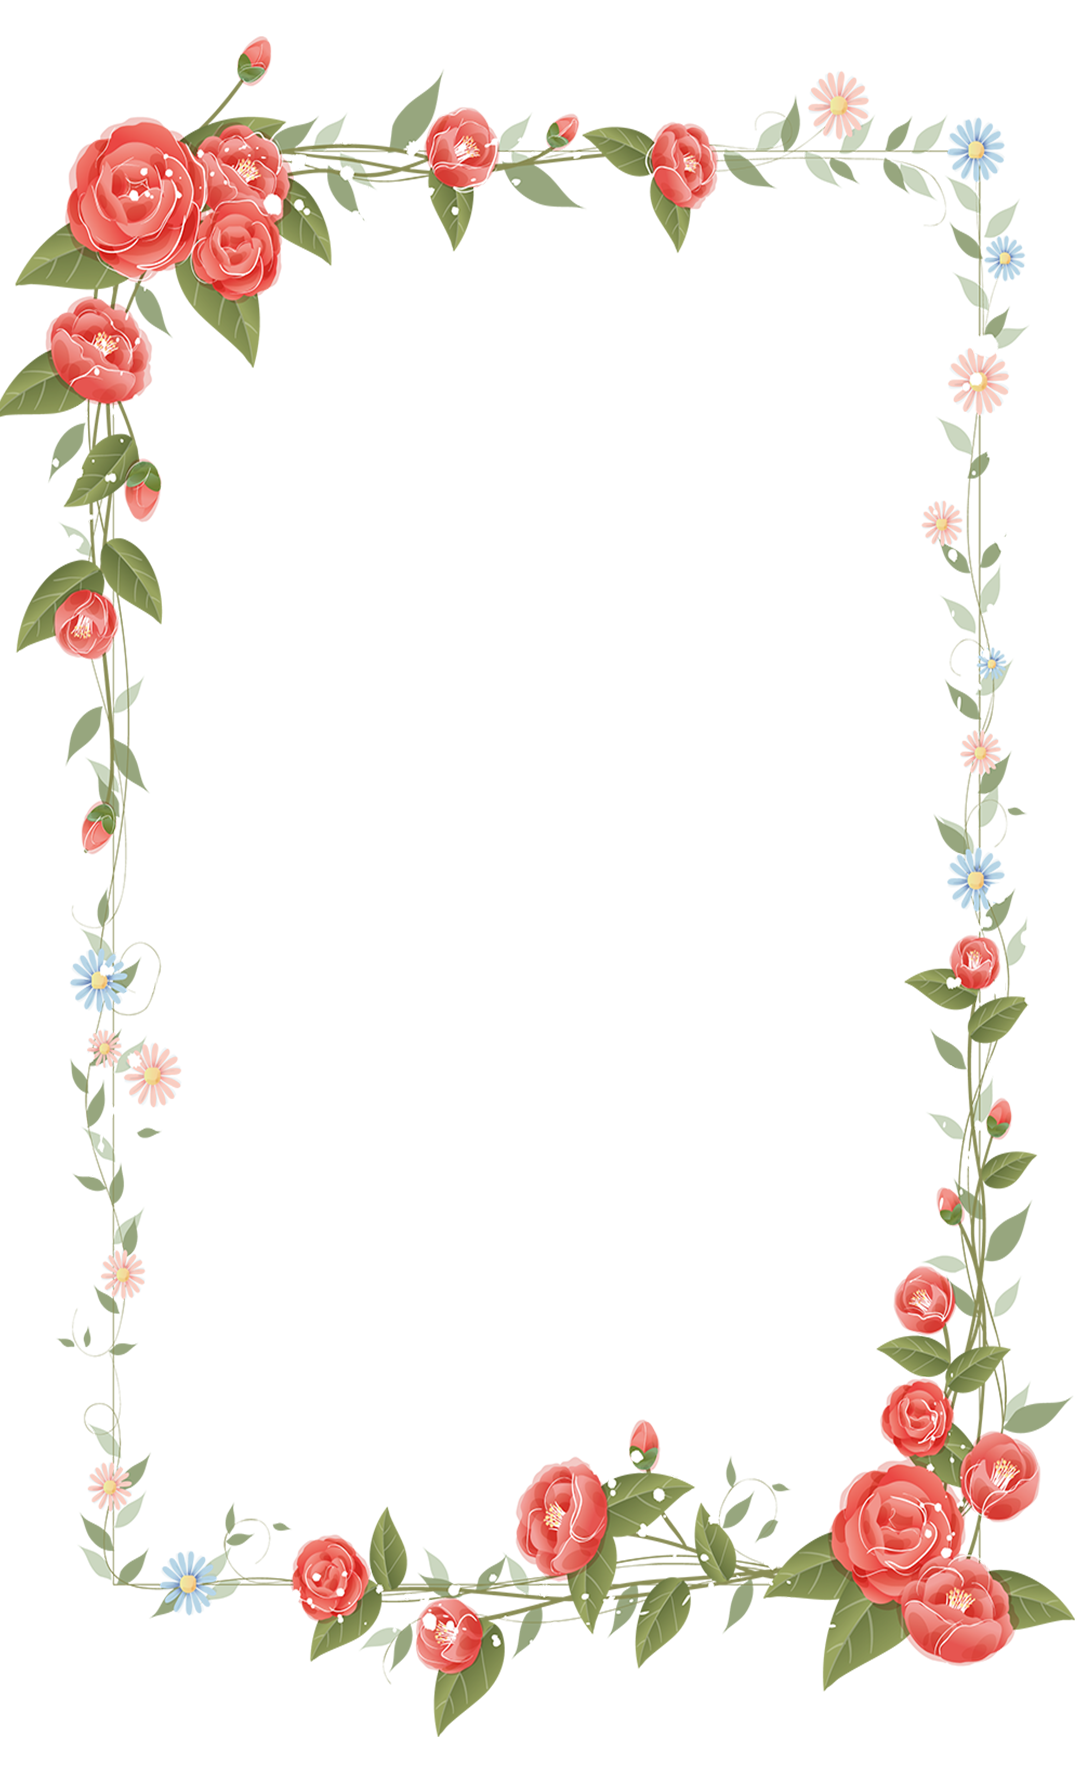 Hand Drawn Border Png Border Flowers Drawing Clip Art Hand Painted